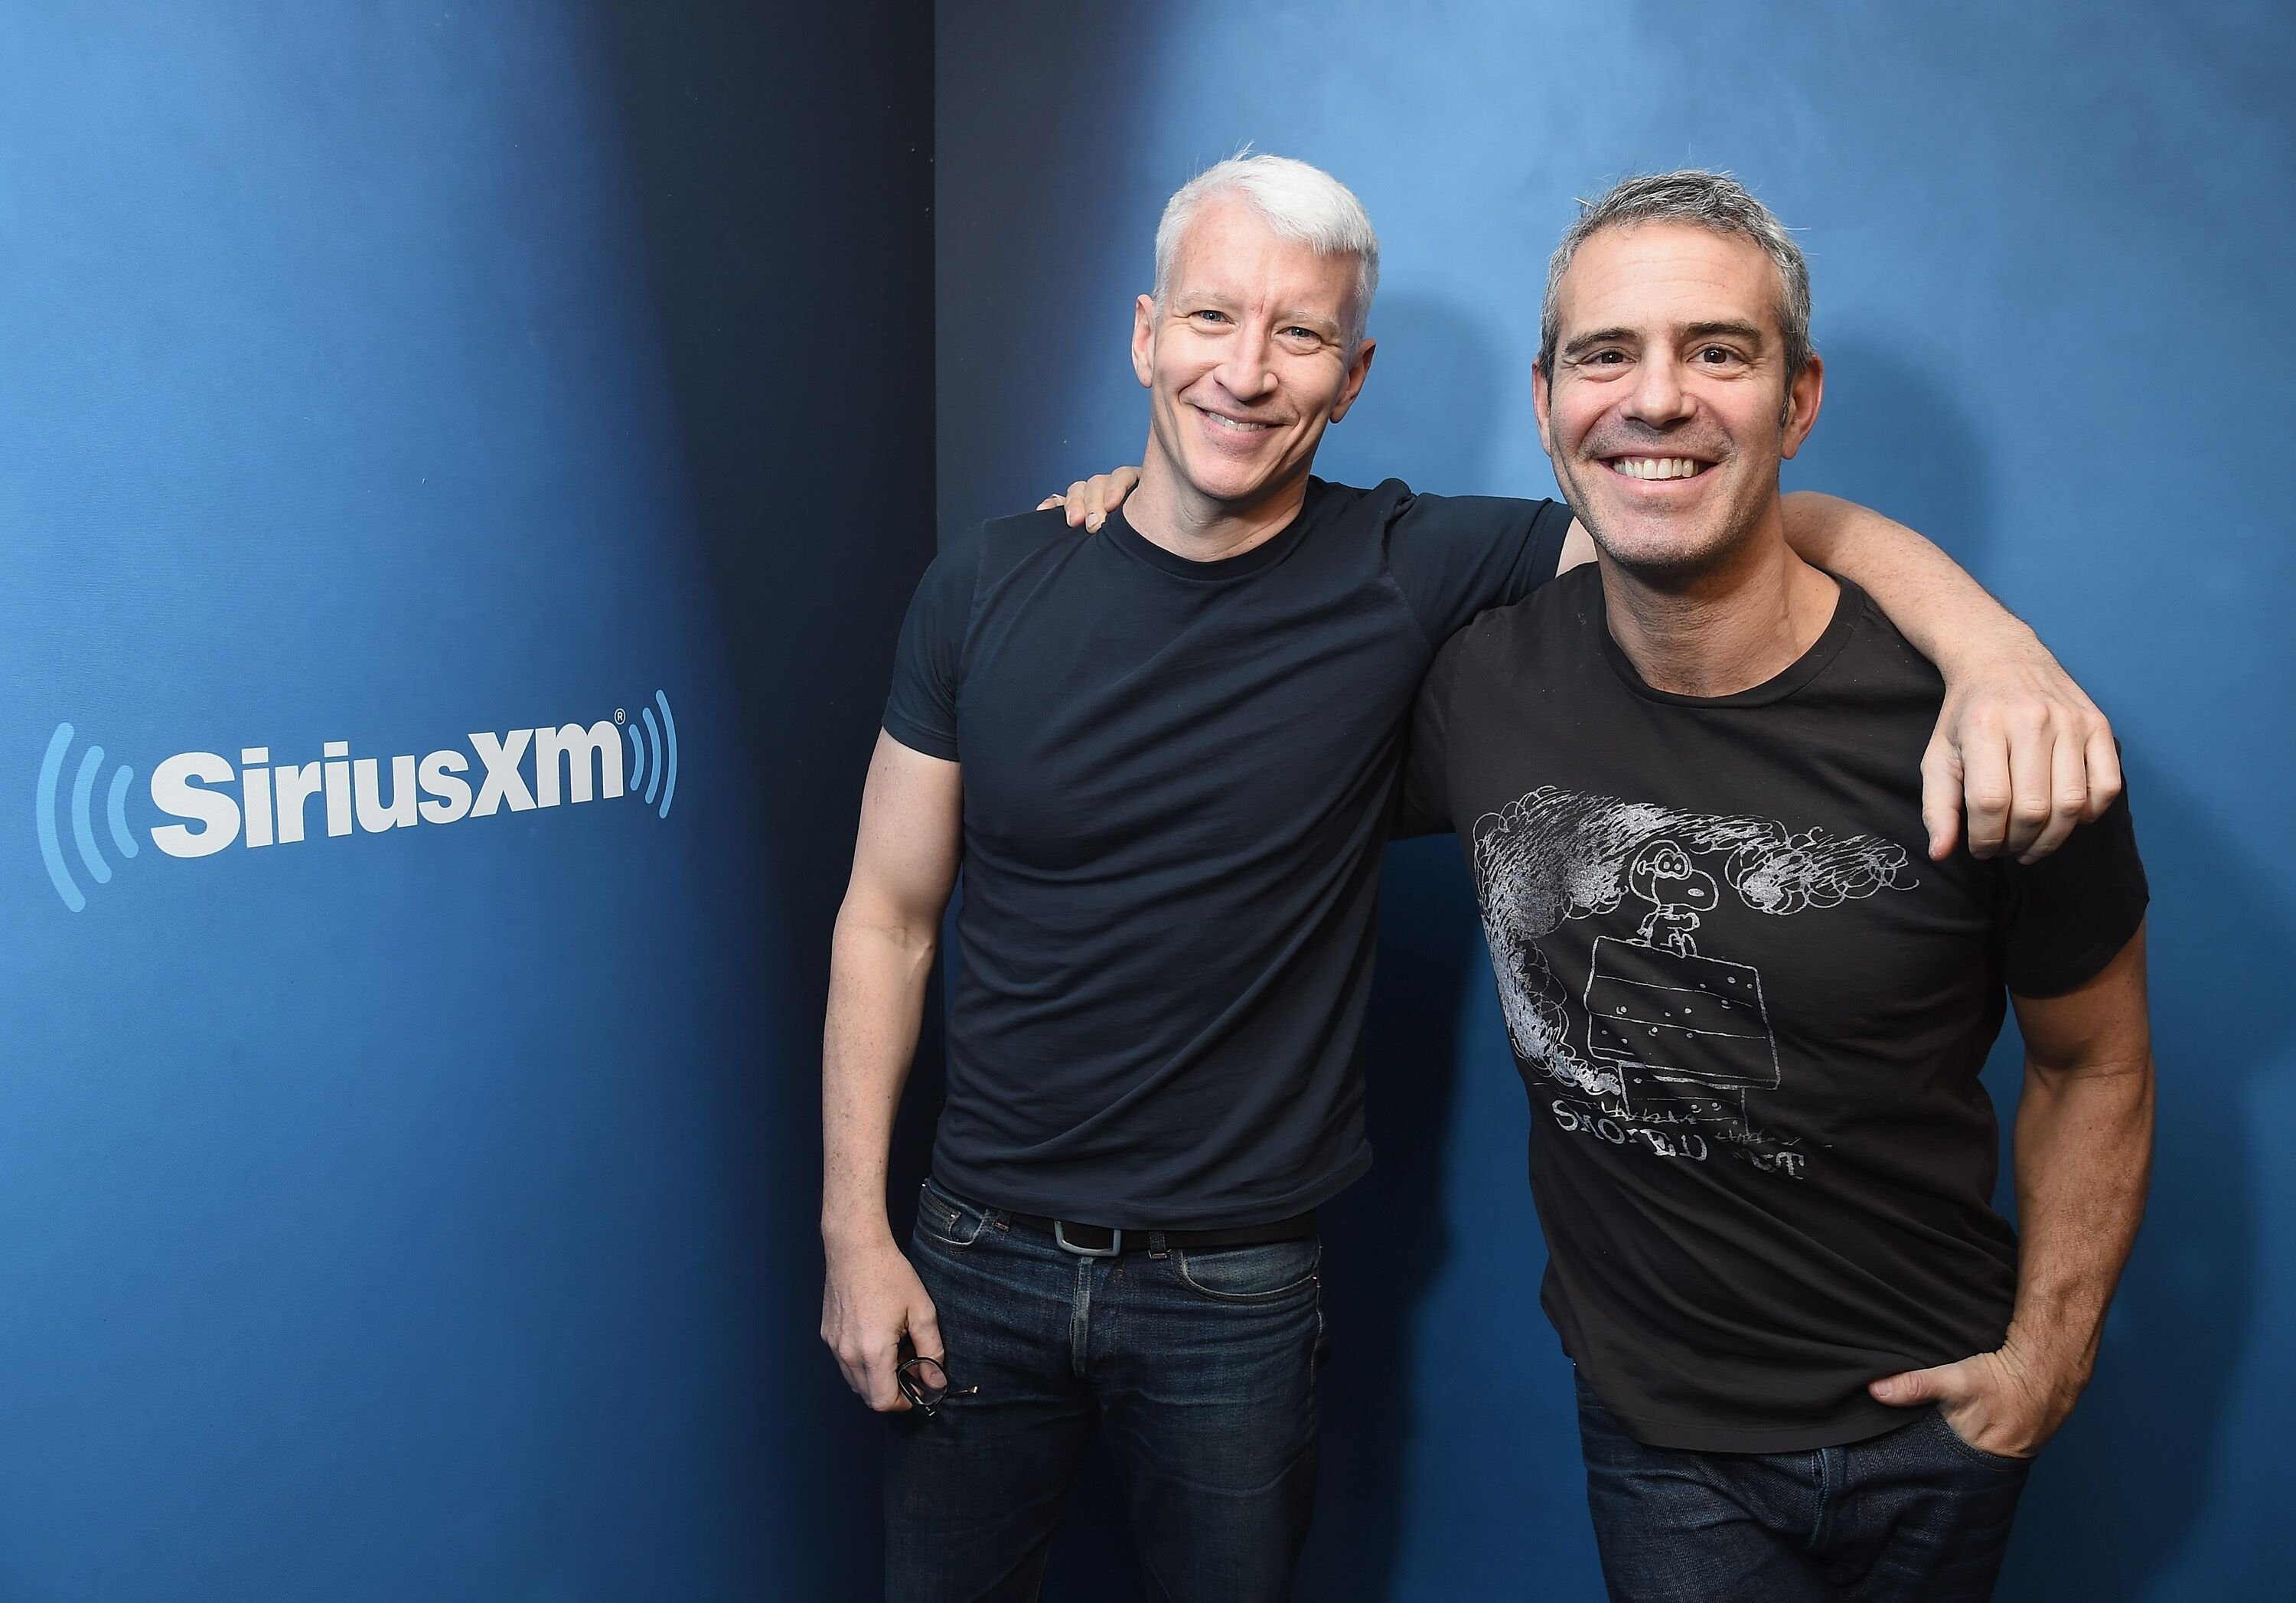  Anderson Cooper and host Andy Cohen at SiriusXM Studios. | Source: Getty Images